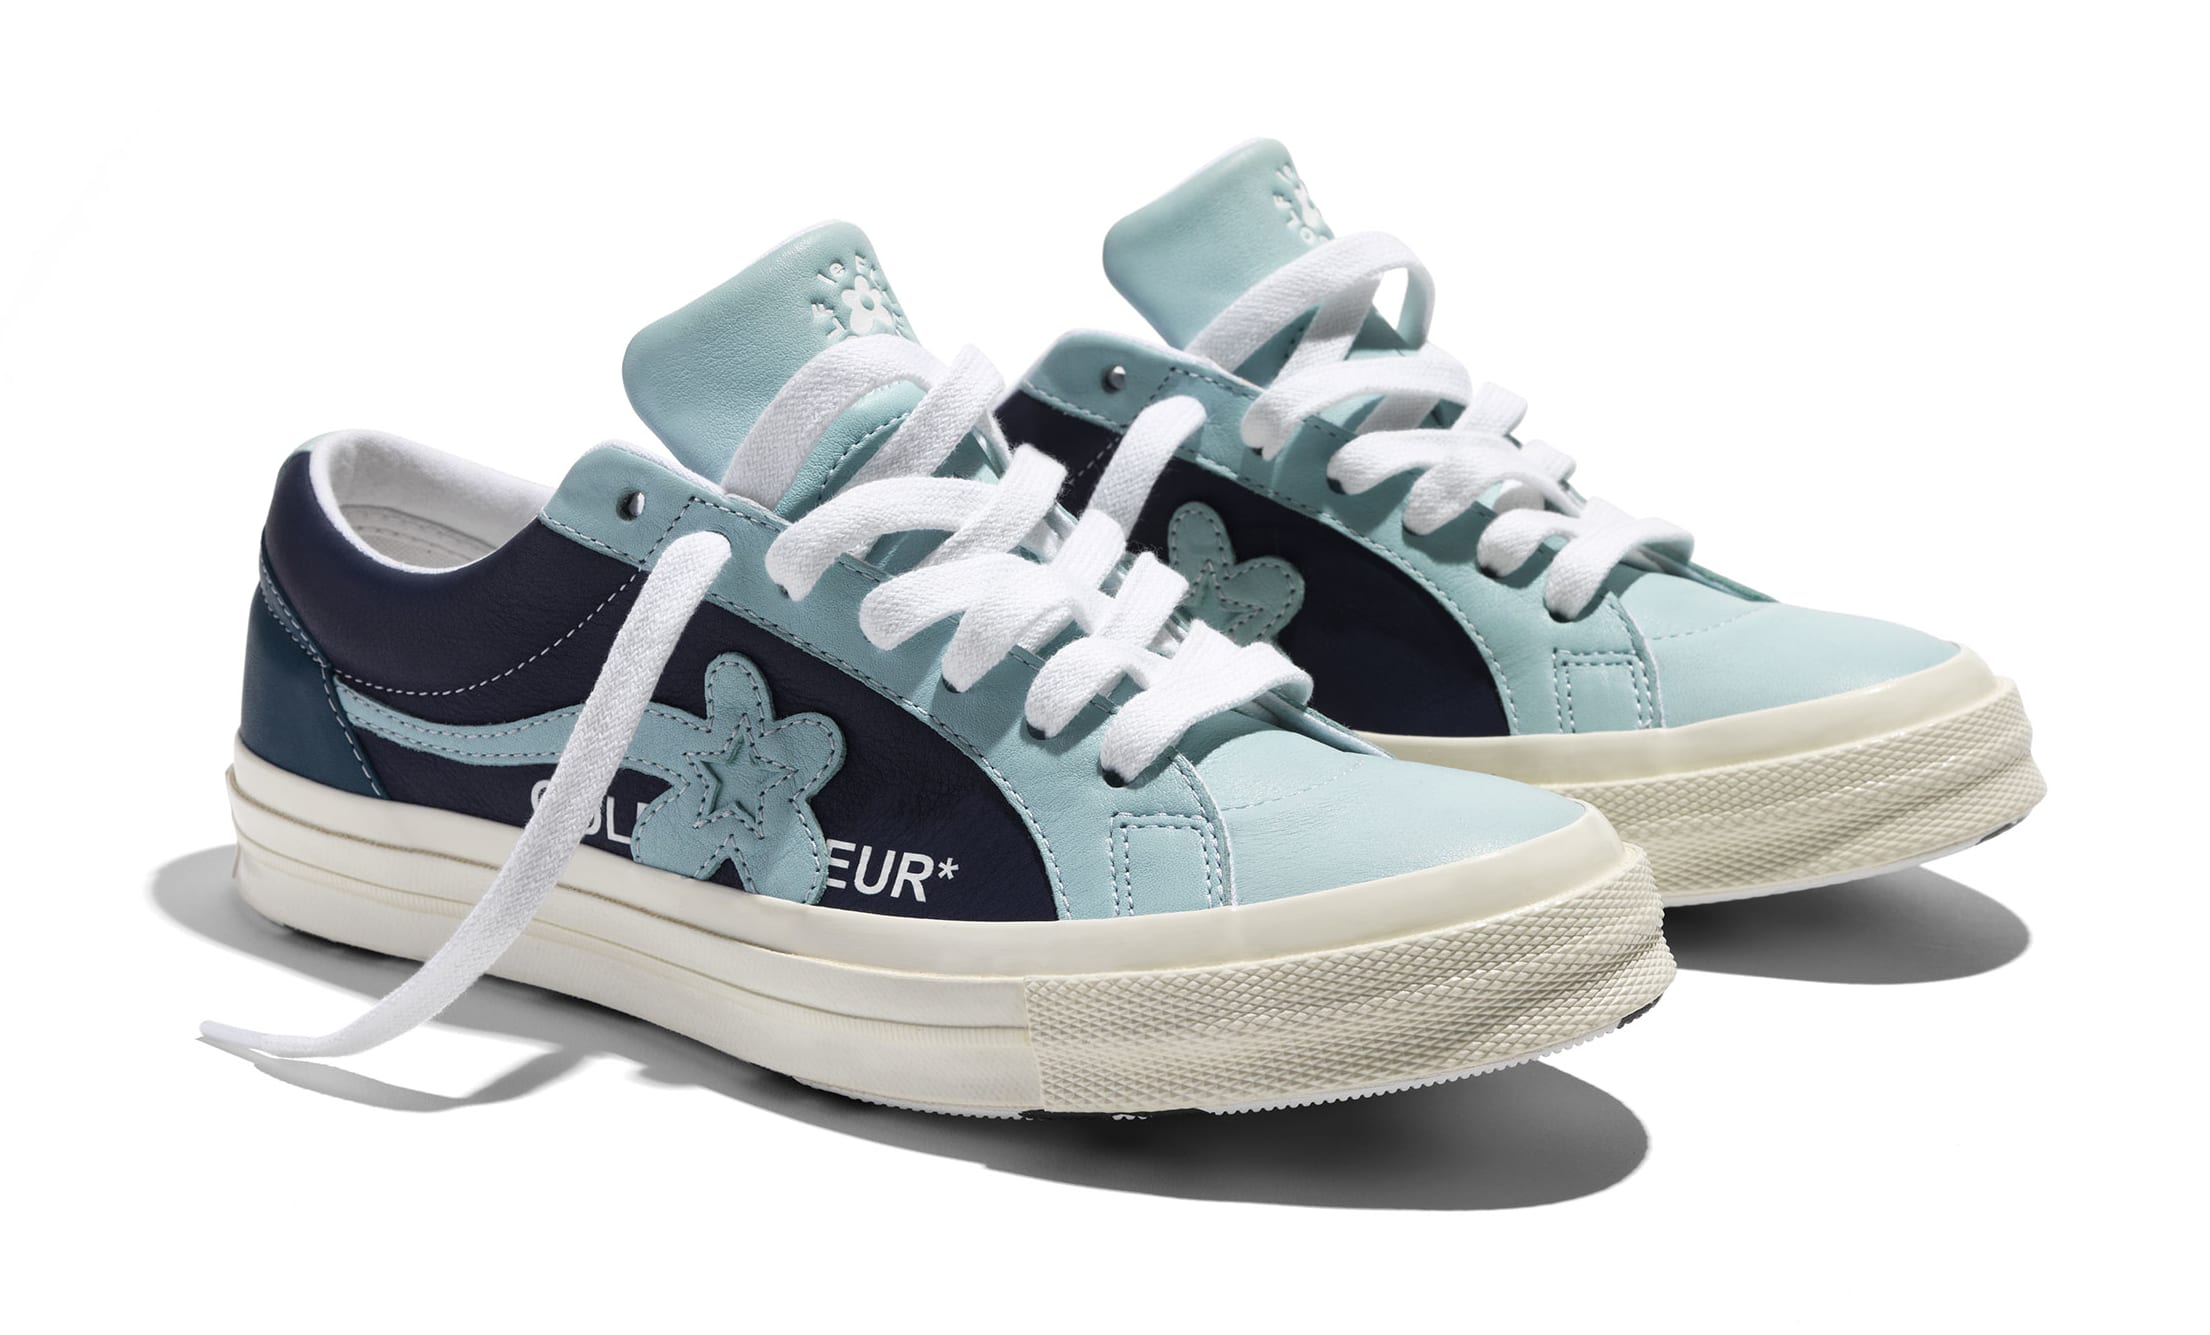 Look at the Converse Golf Le Fleur 'Industrial' Pack | Complex